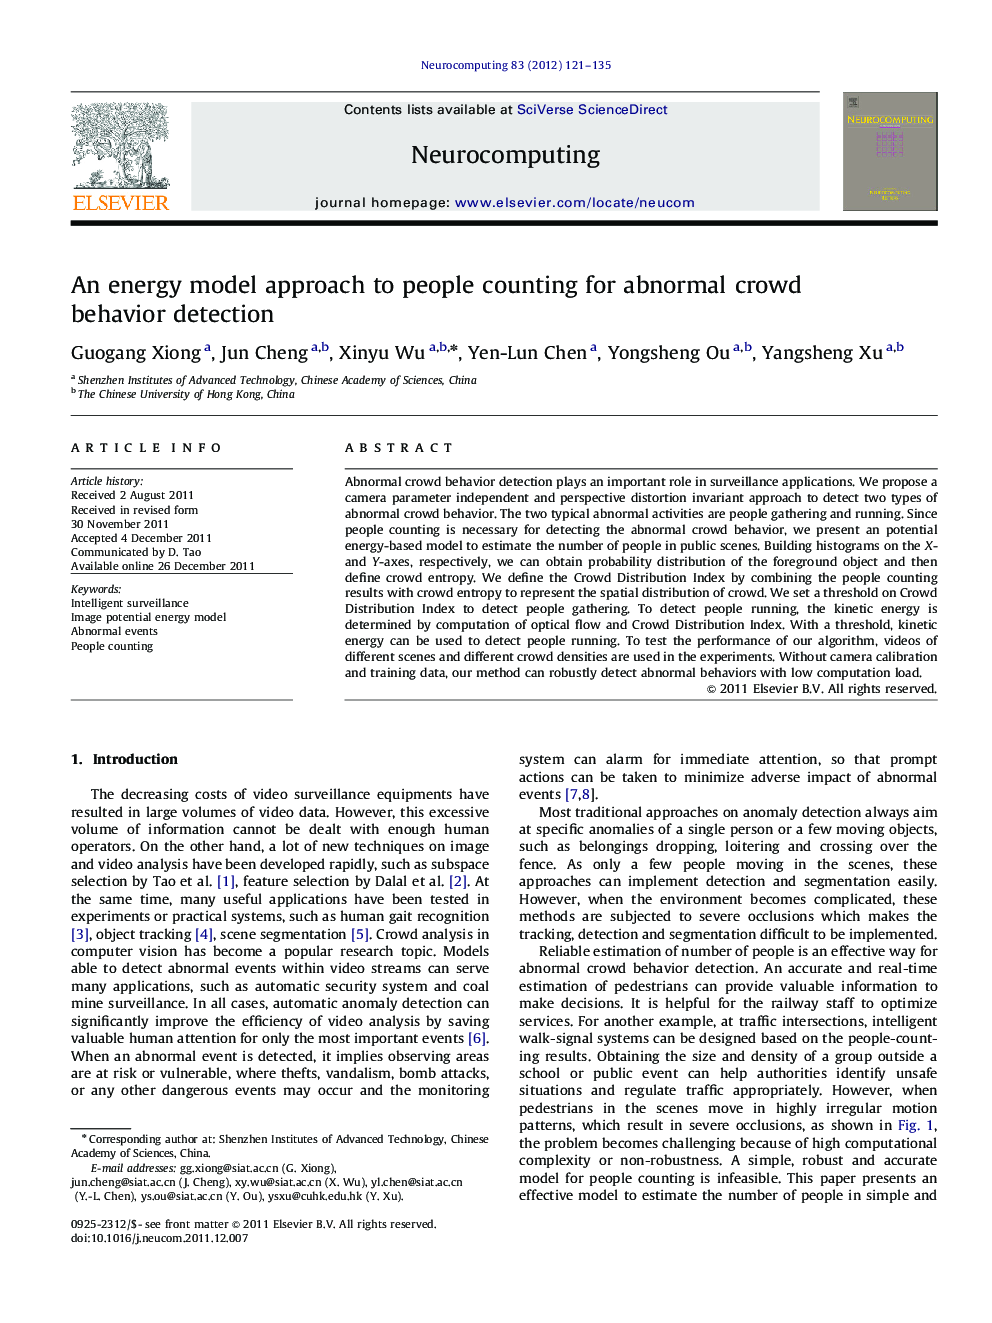 An energy model approach to people counting for abnormal crowd behavior detection